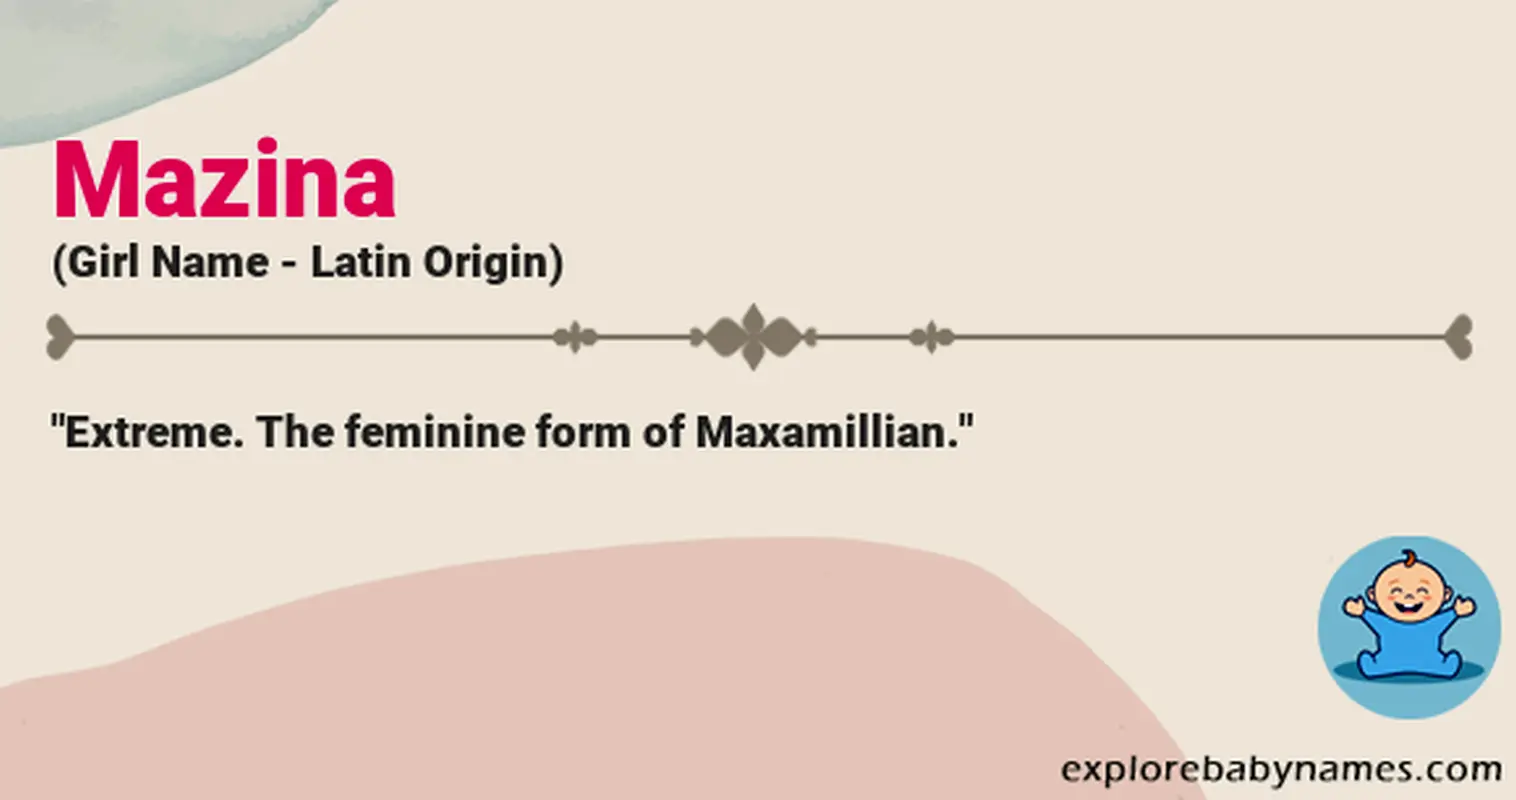 Meaning of Mazina